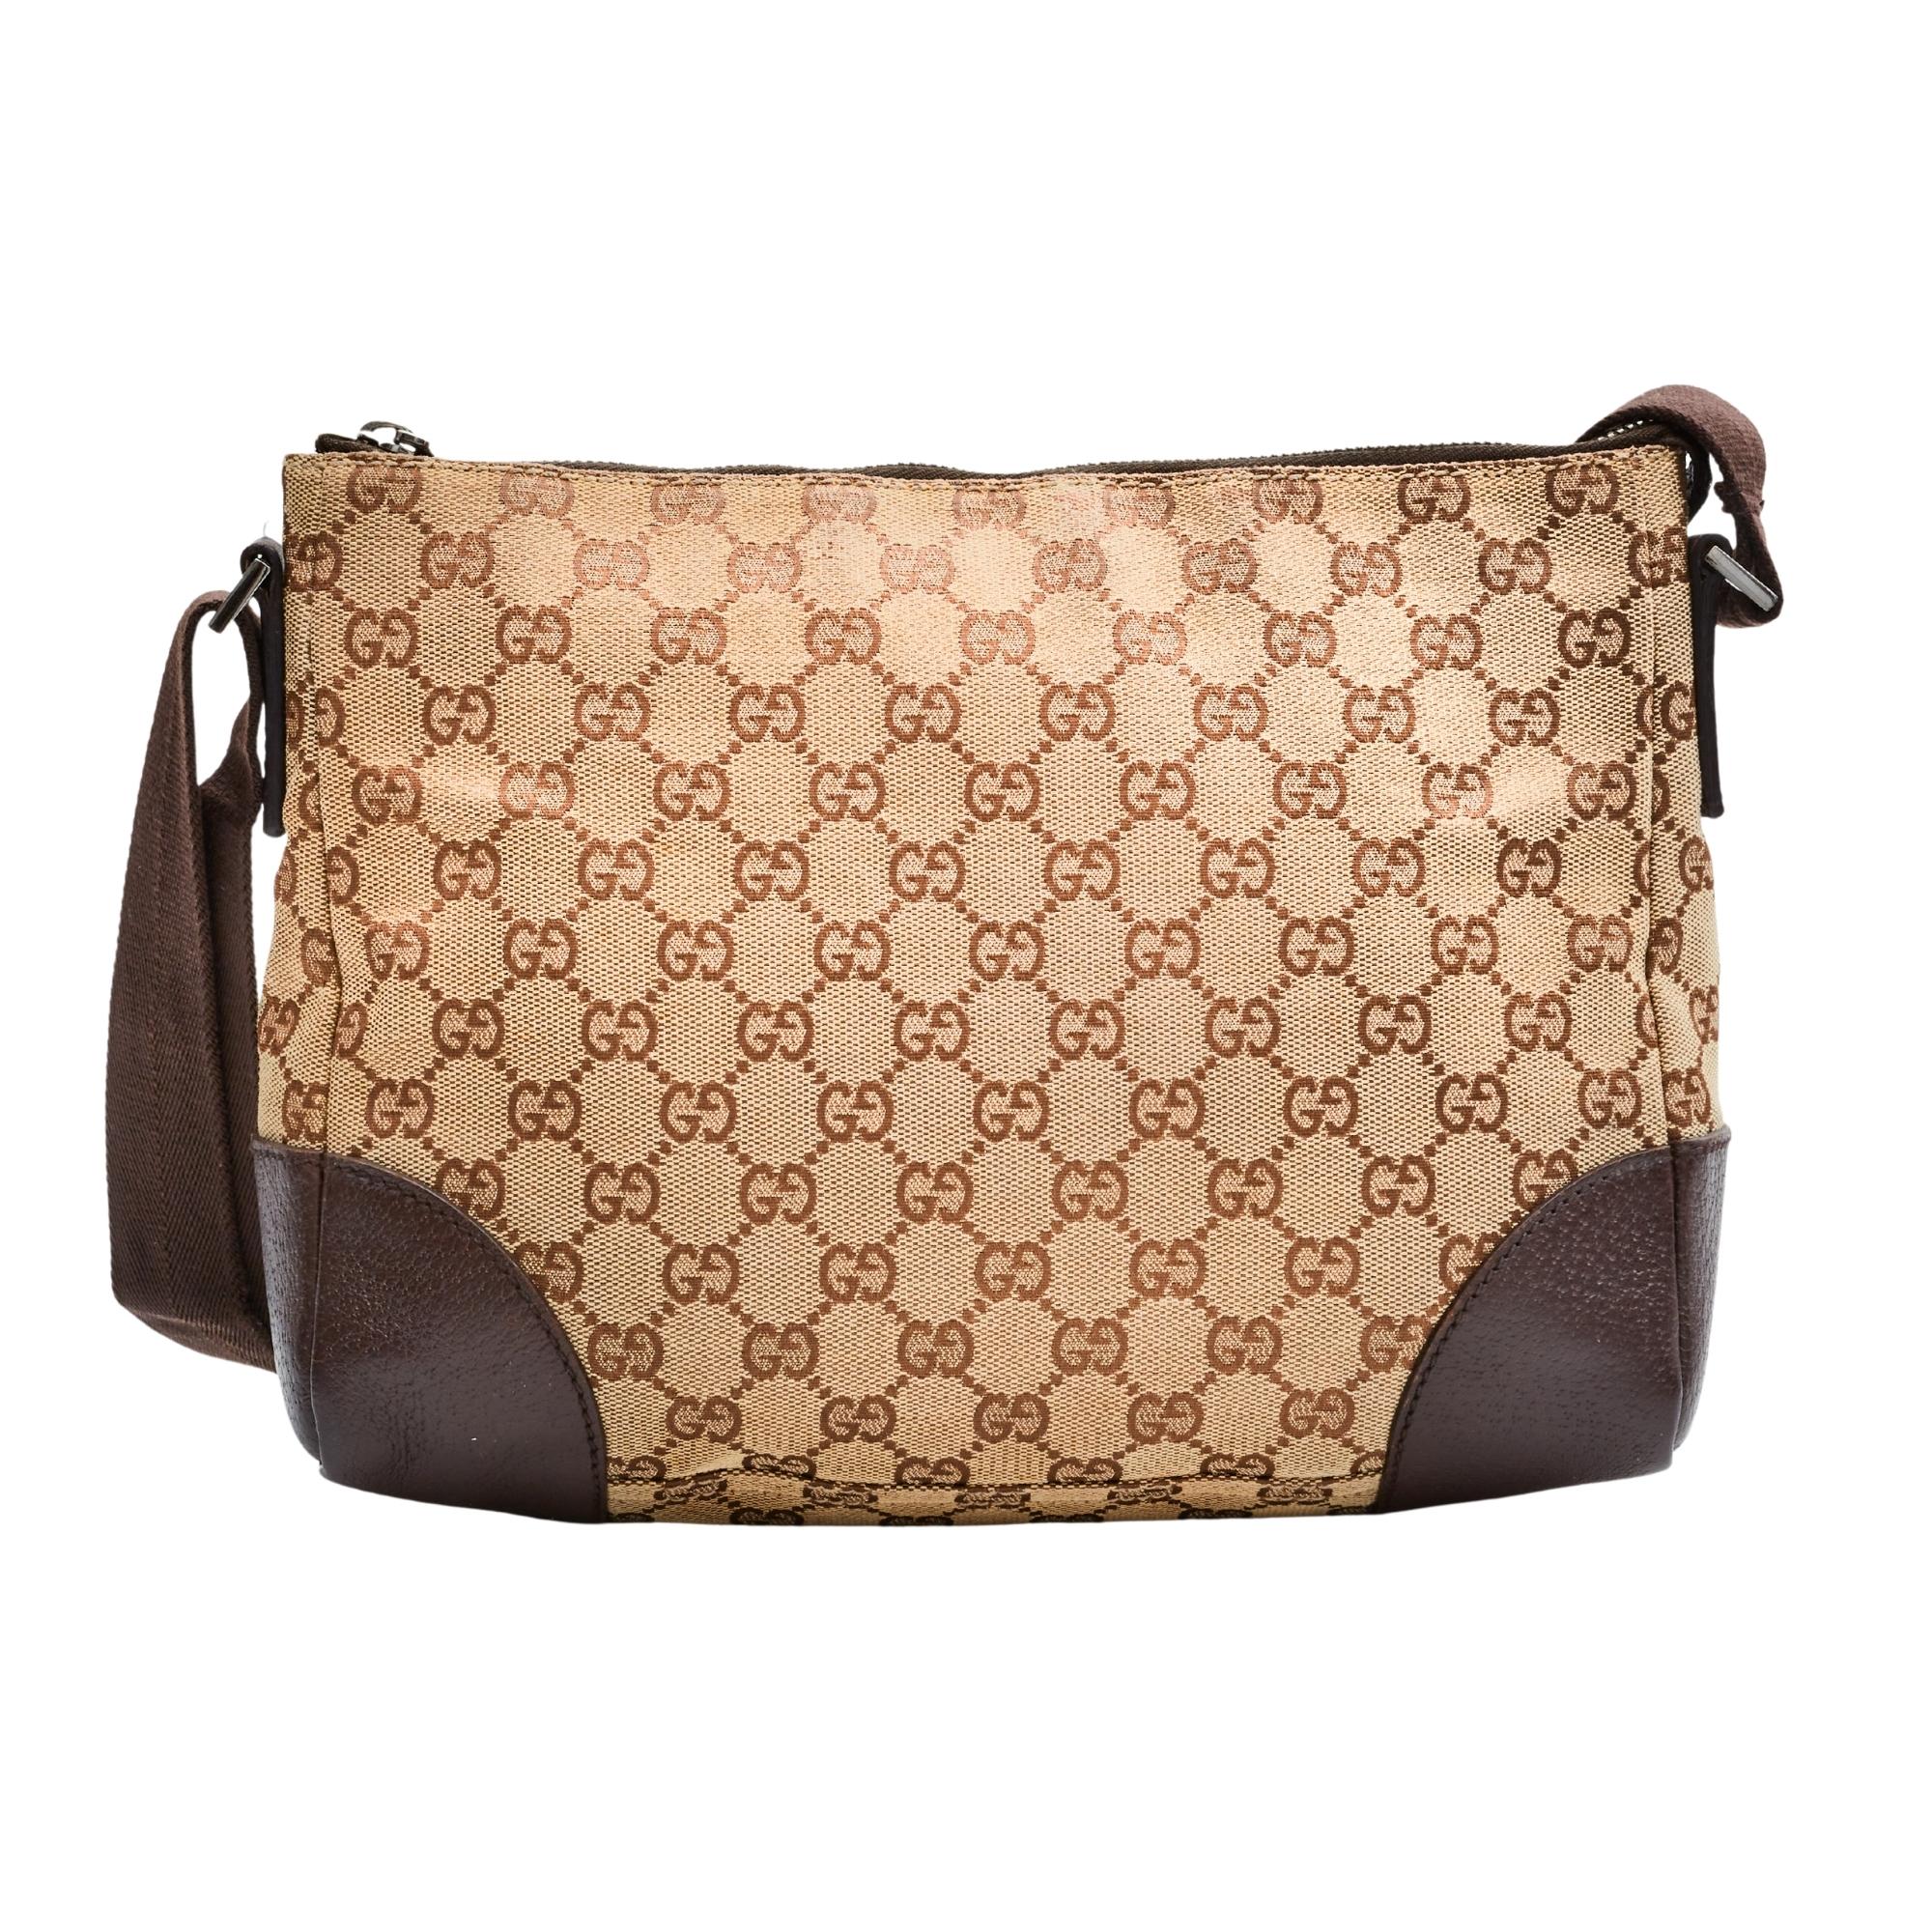 This bag is made with beige monogram canvas with brown leather trim. Featuring a top zip closure, one internal zip pocket and a brown interior.

COLOR: Beige monogram with brown trim. 
MATERIAL: Canvas with leather trim.
ITEM CODE: 114273
MEASURES: